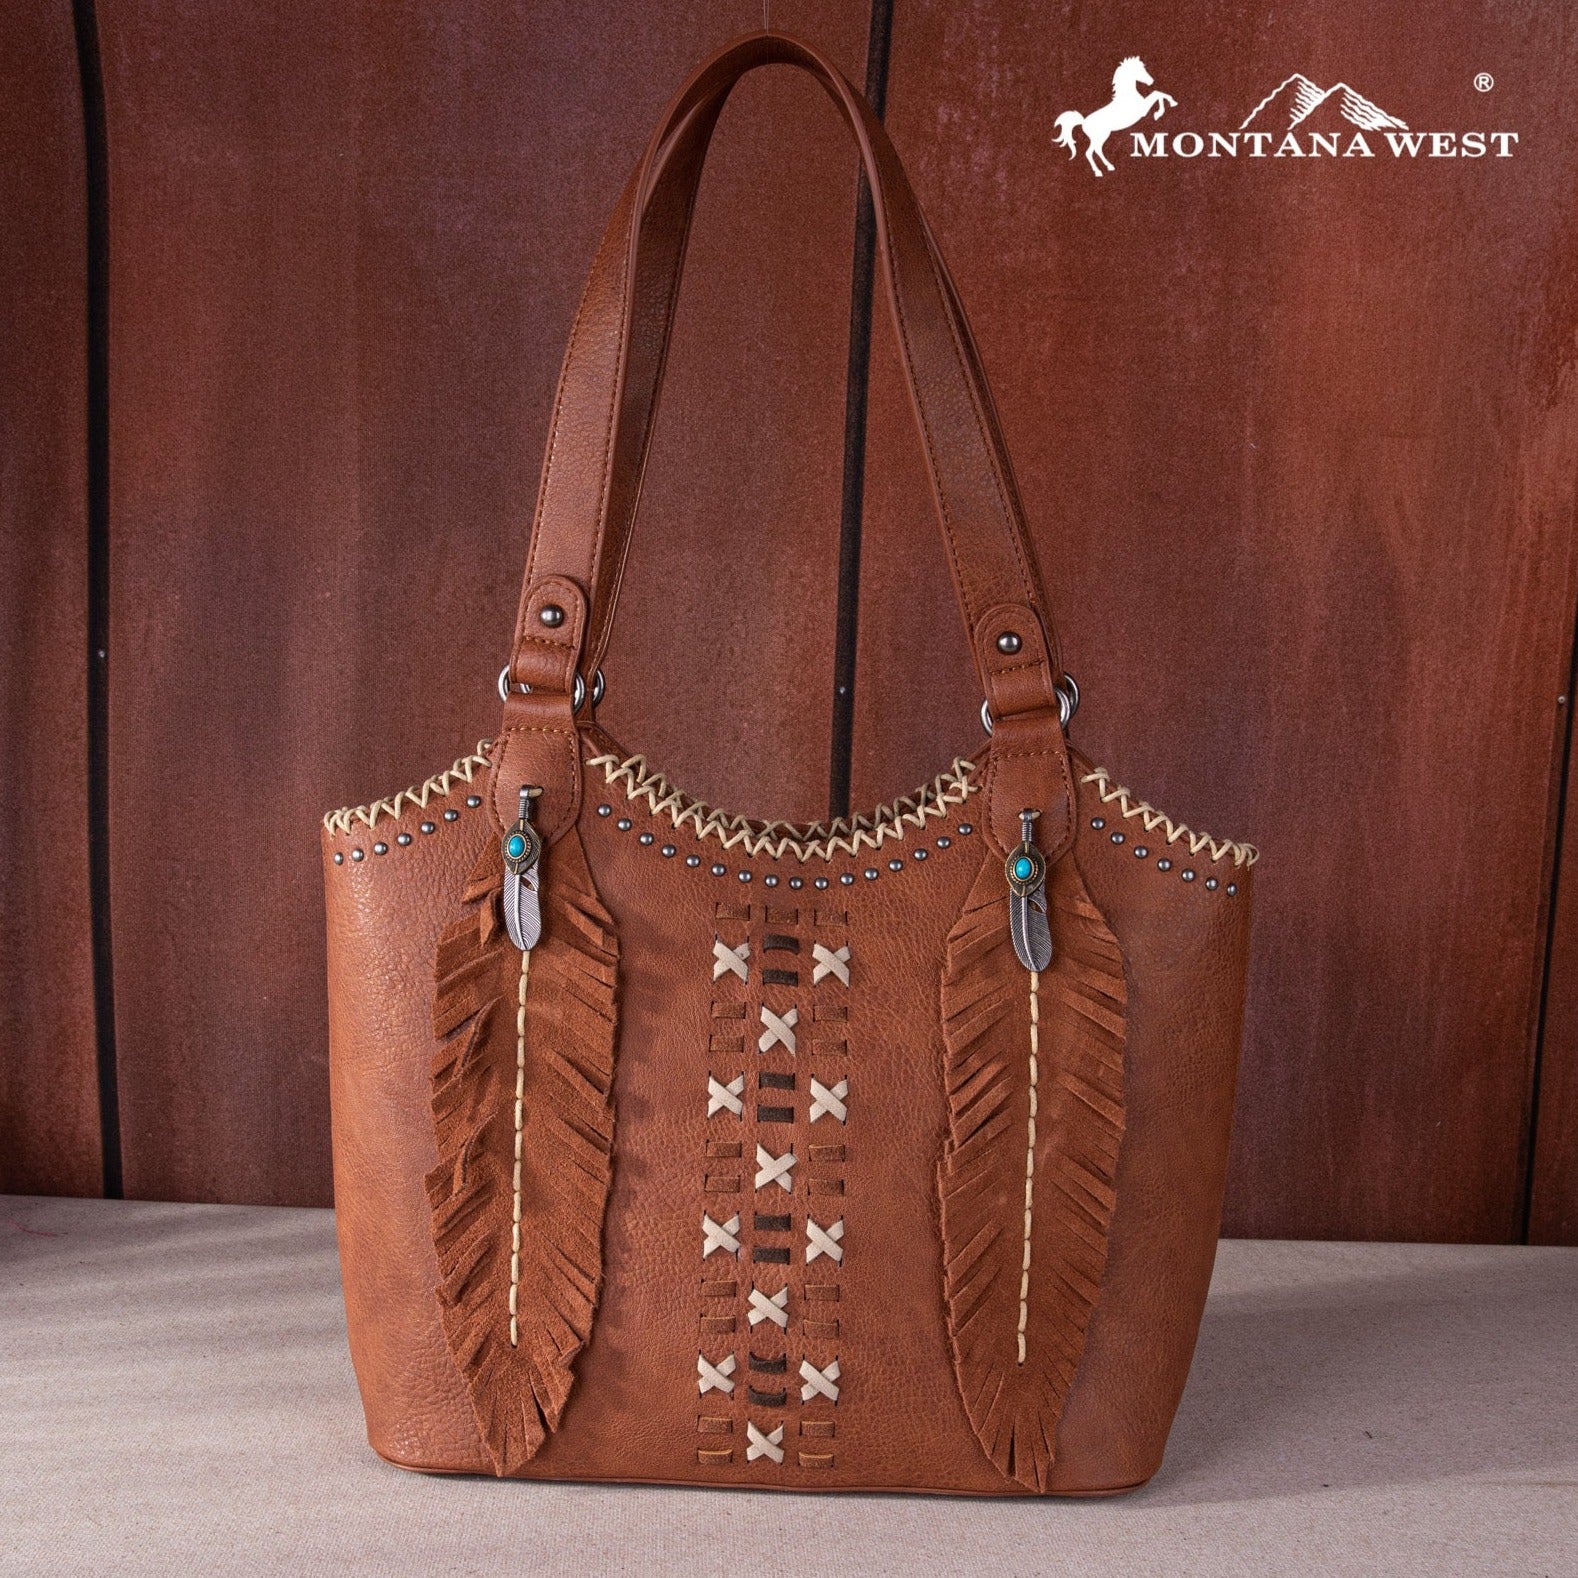 Montana West Feather Whipstitch Tote Bag - Montana West World